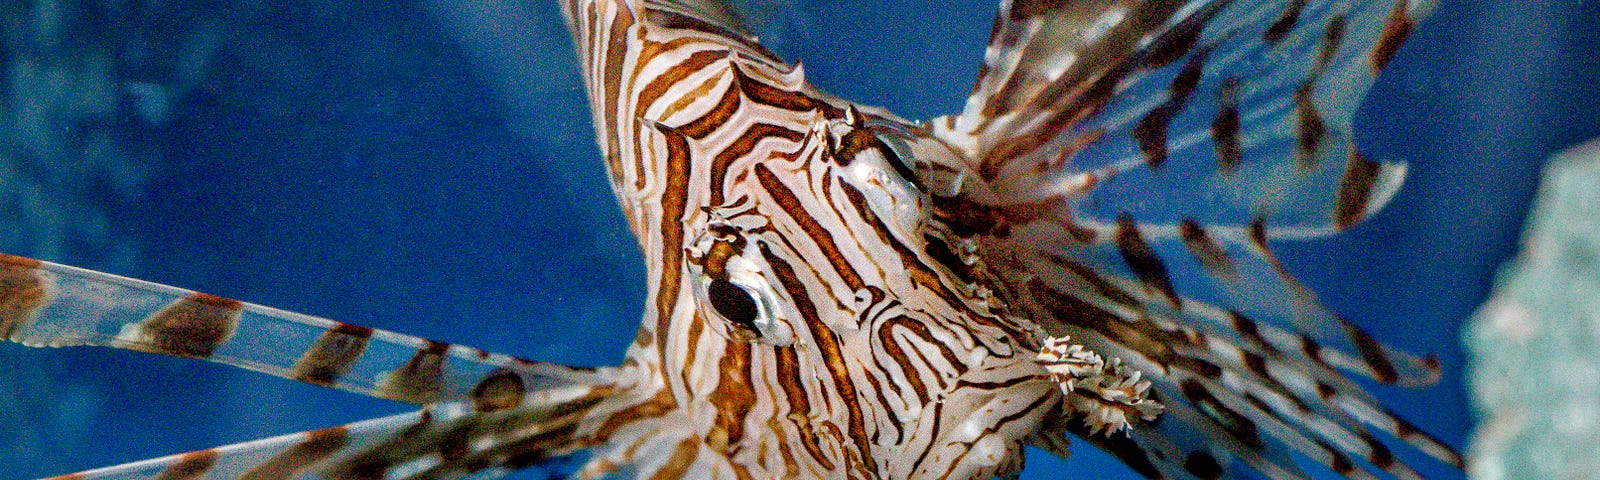 Close-up underwater shot of a lionfish swimming in the sea.